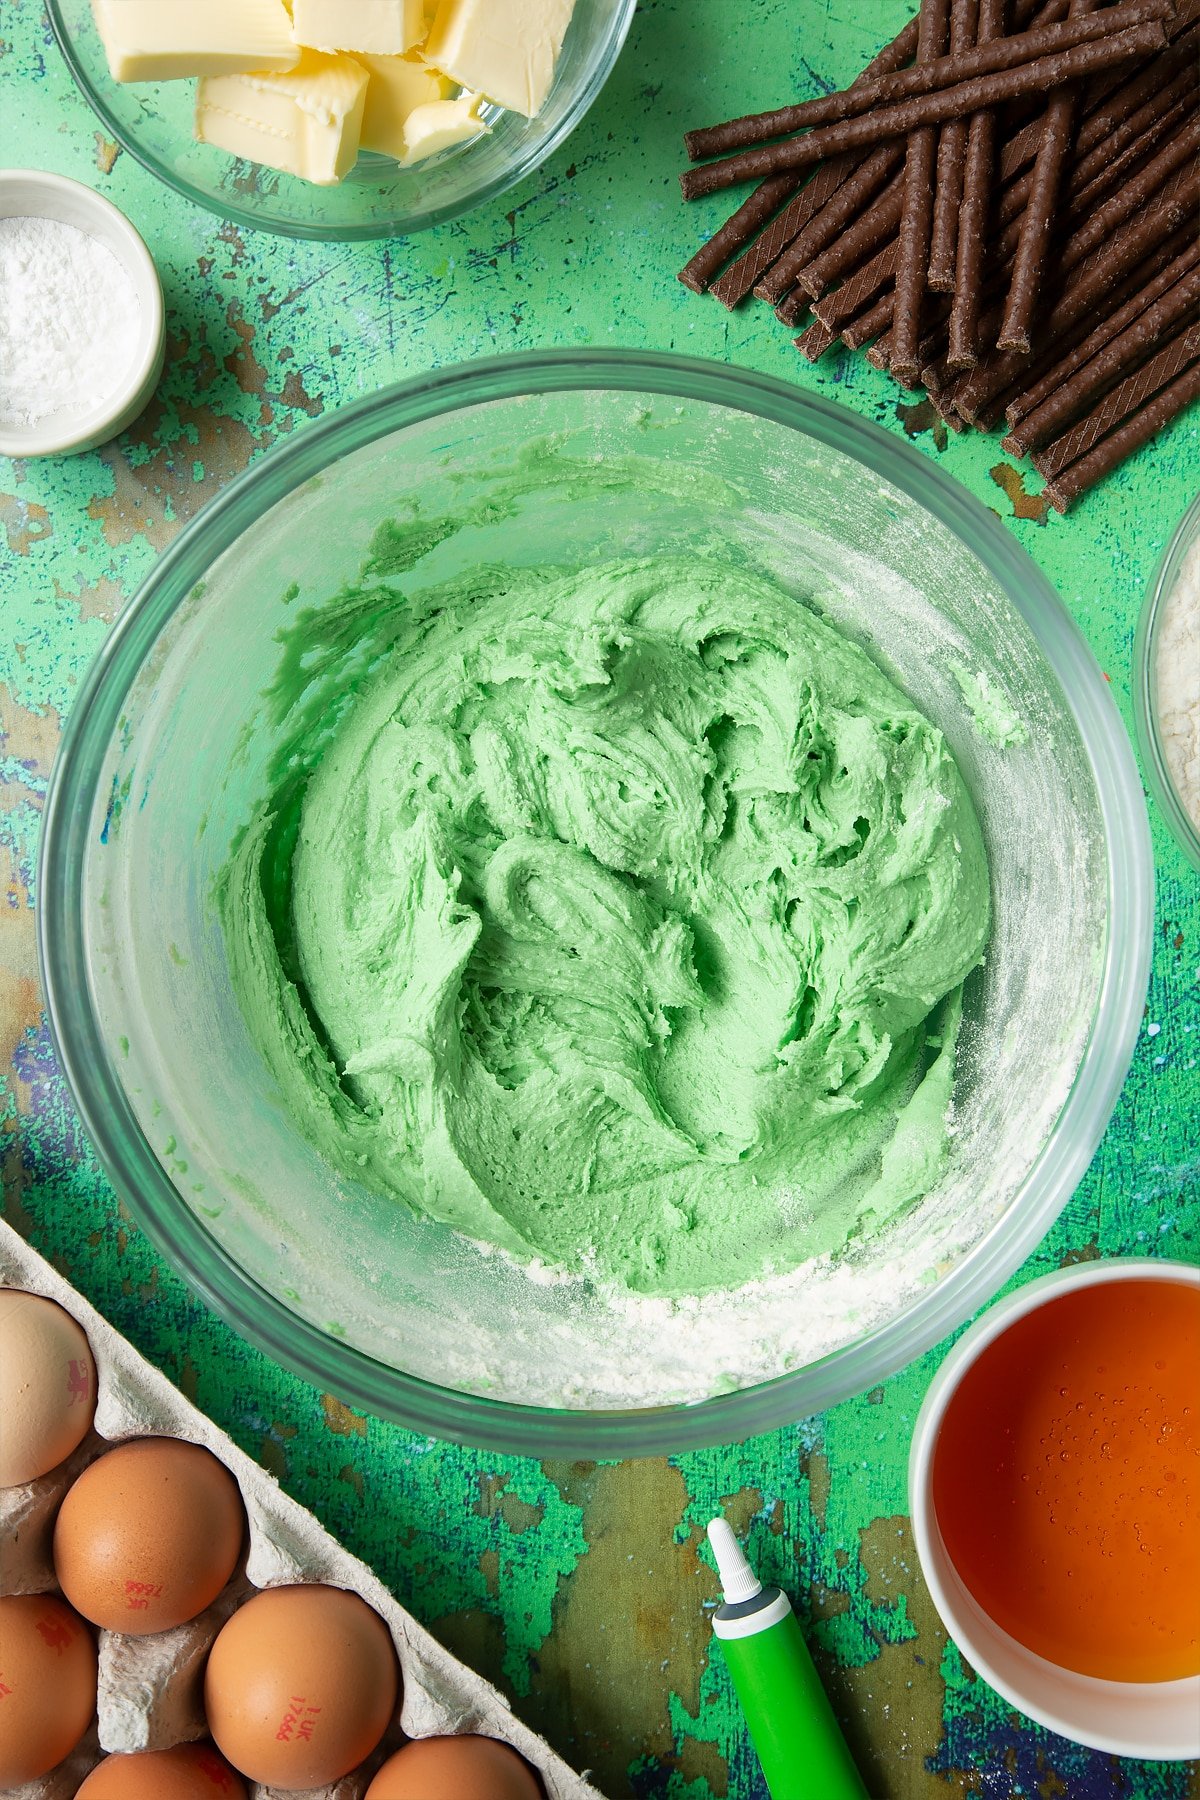 Green cookie dough in a mixing bowl. Ingredients to make Matchmaker cookies surround the bowl.